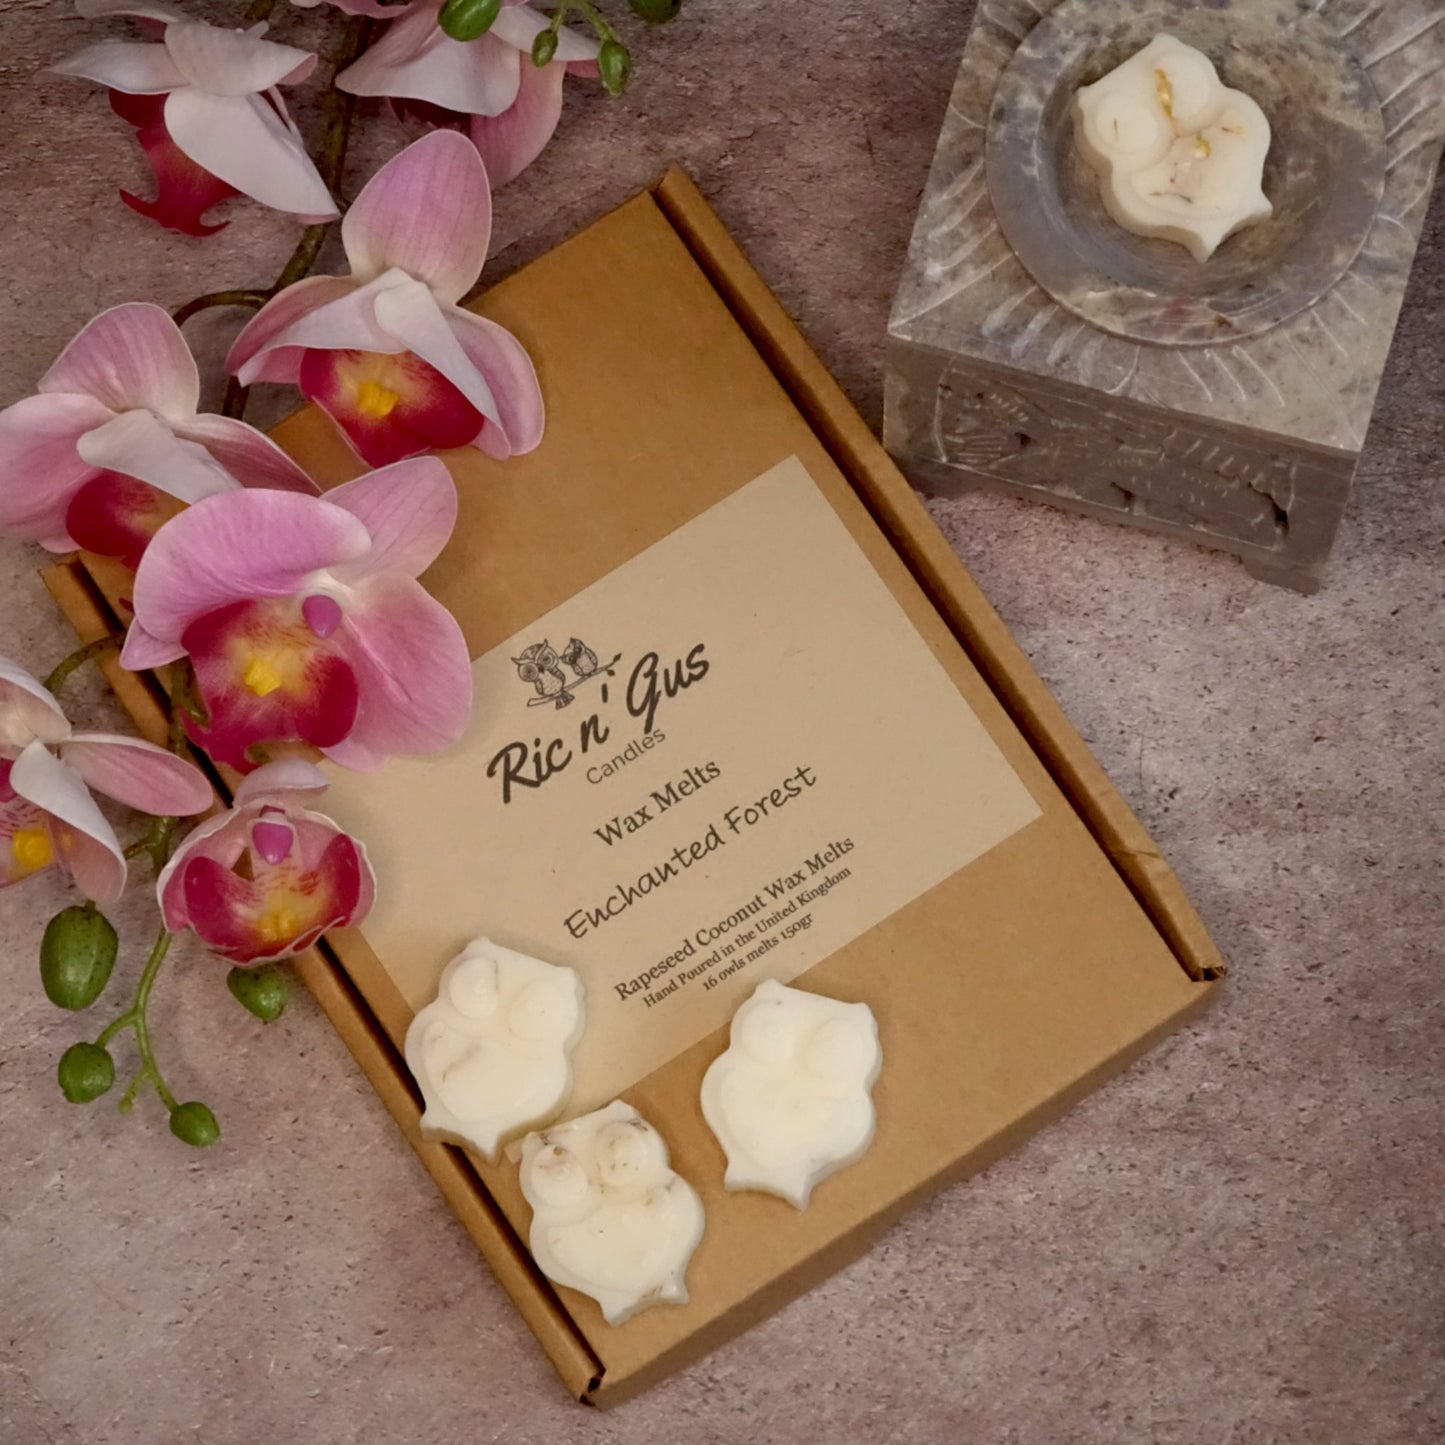 ric n'gus candles enchanted forest botanical scented wax melts 1